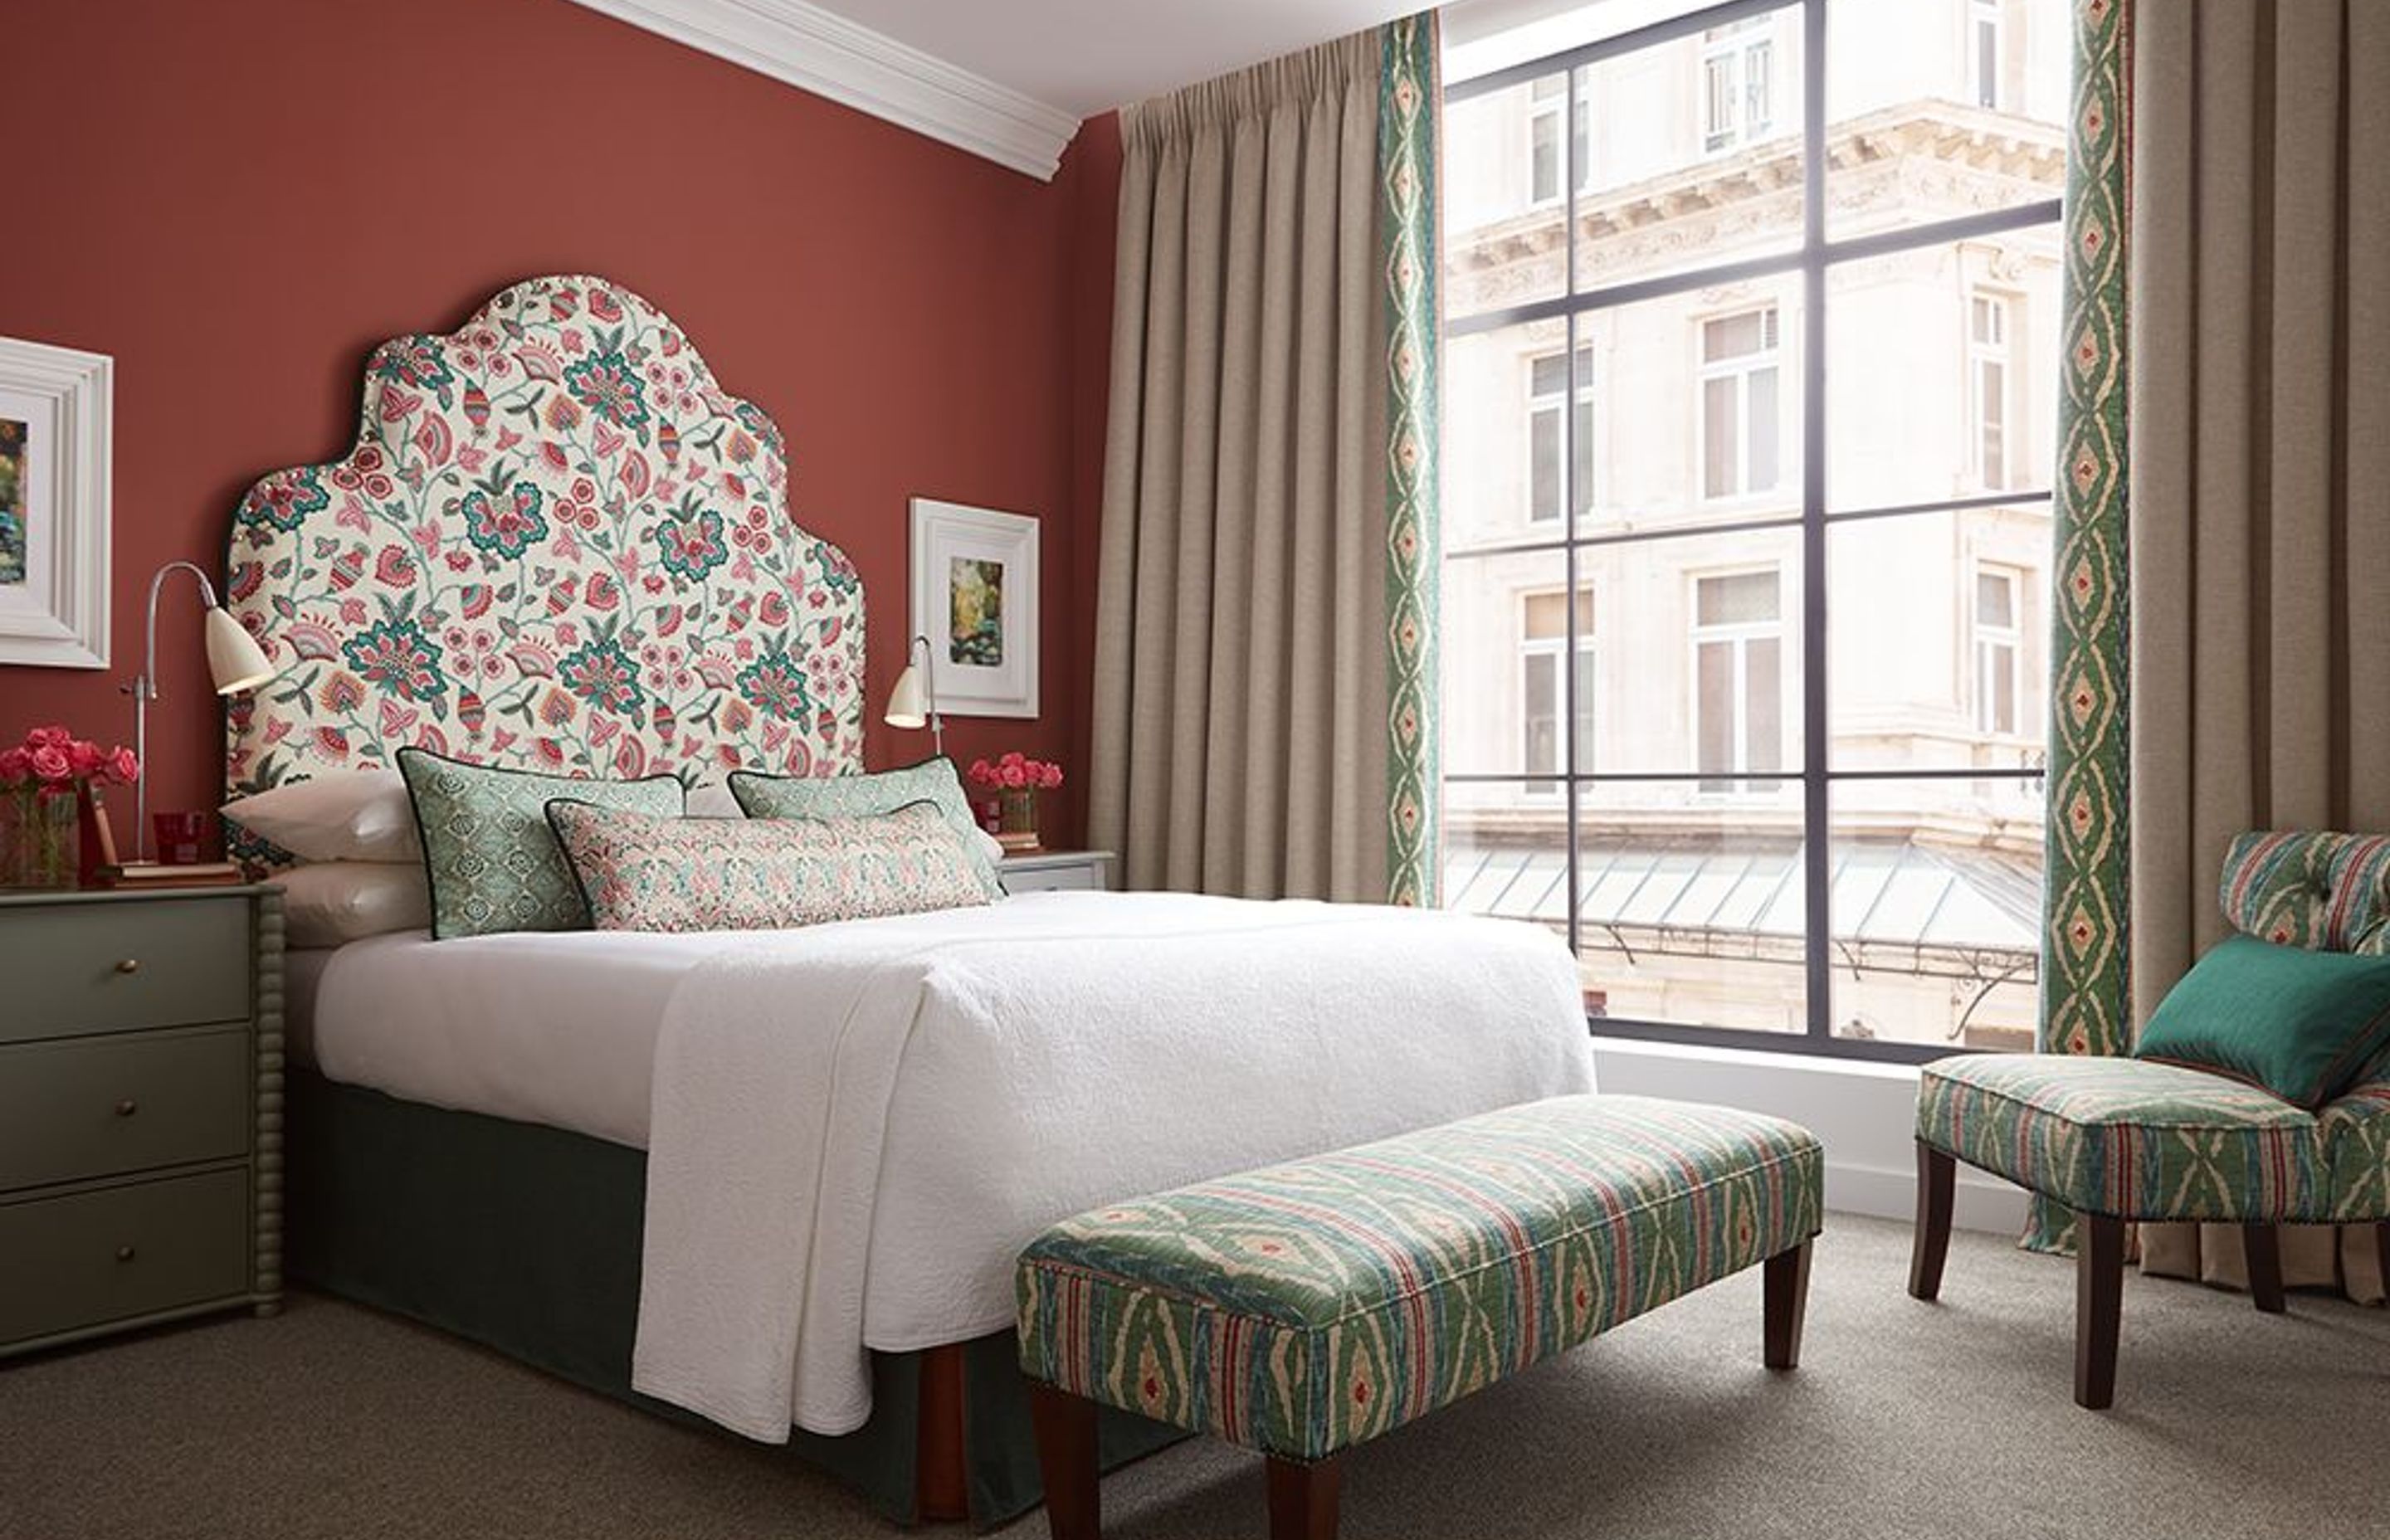 Playful pattern combinations add 'wow' factor to this bedroom.